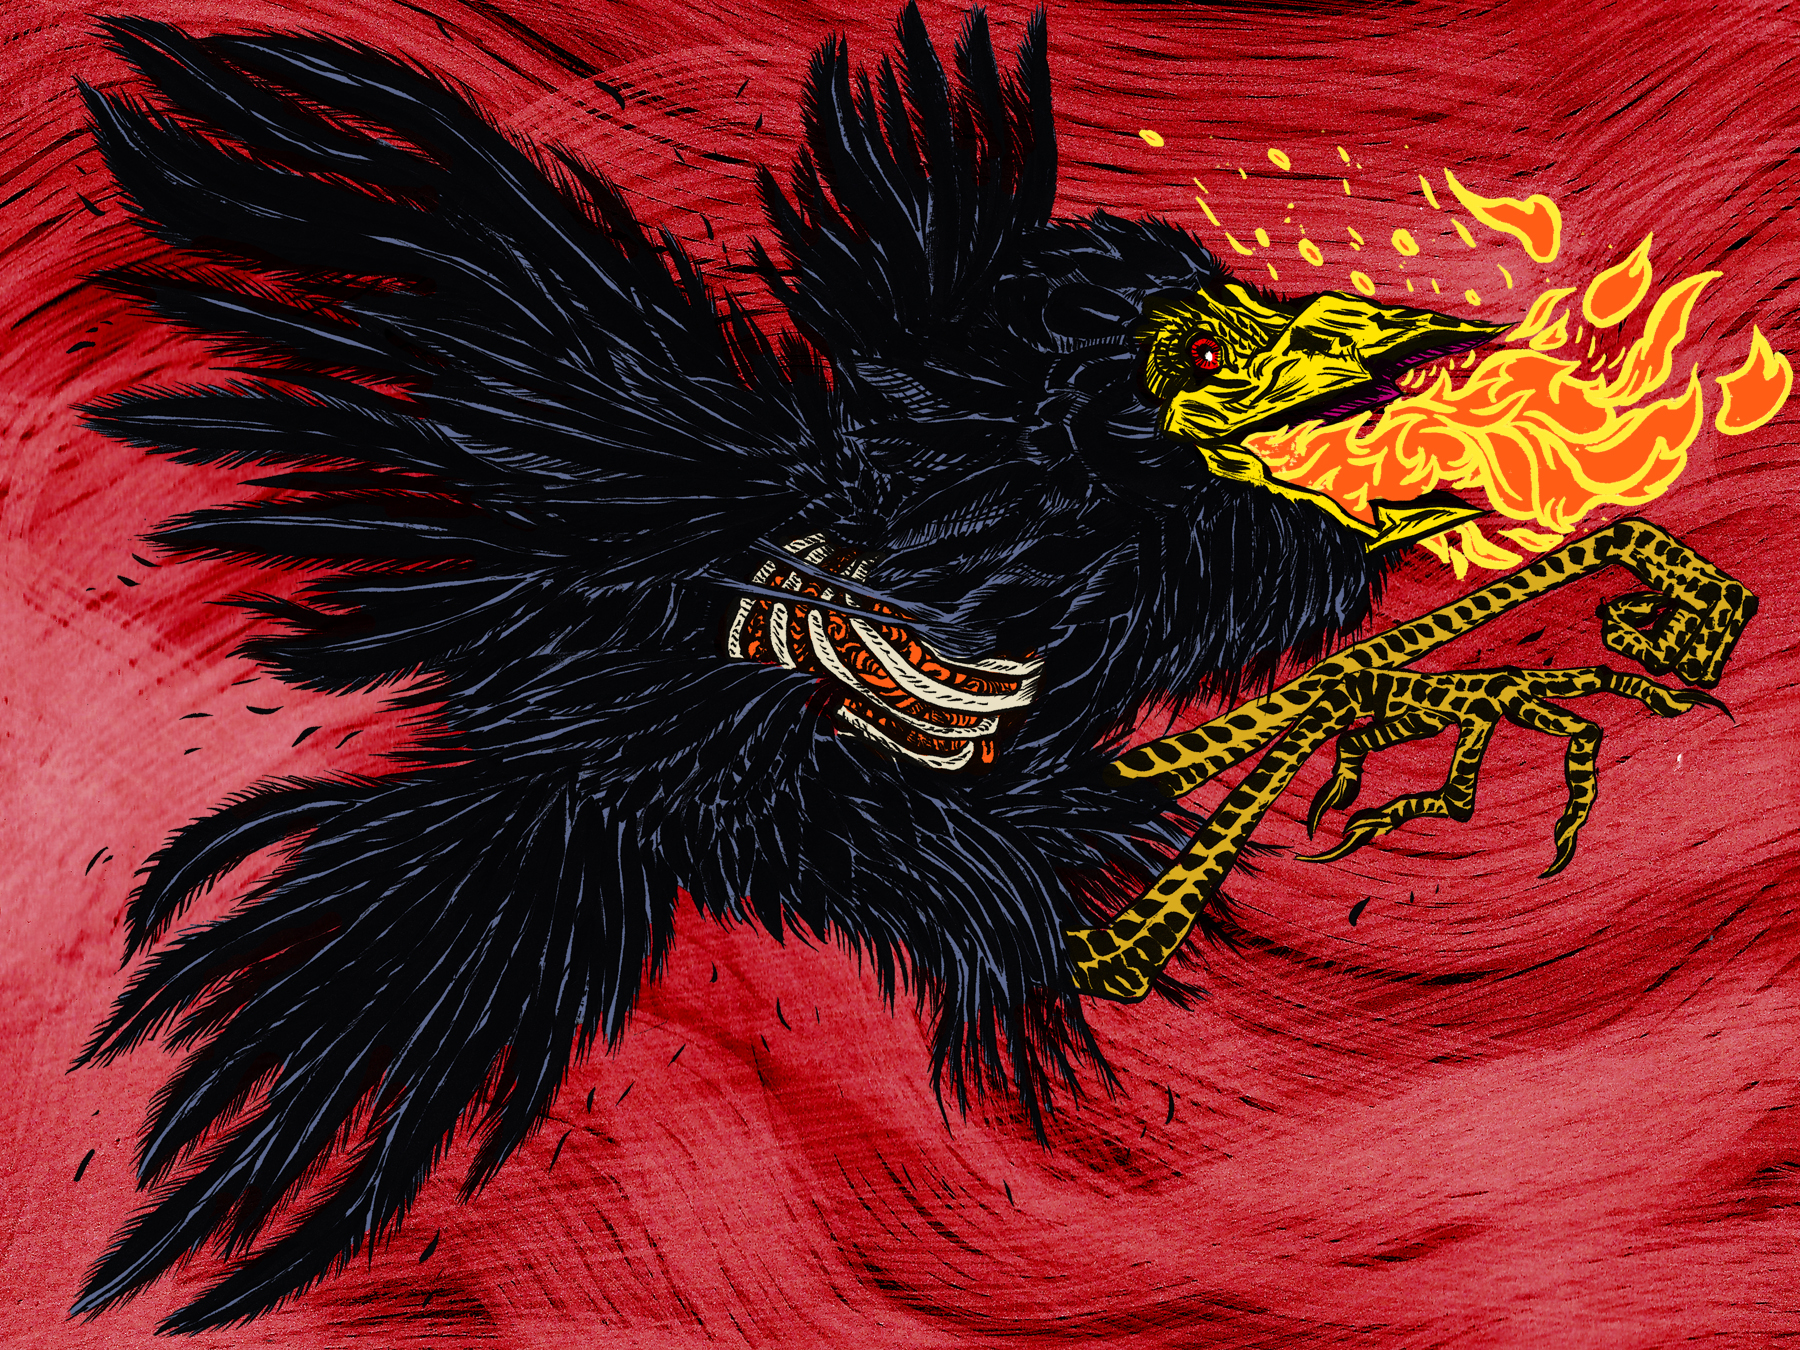 Crow Demon Evil Horror Ink Amp Brush Monster Photoshop Psychedelic Surreal 1800x1350